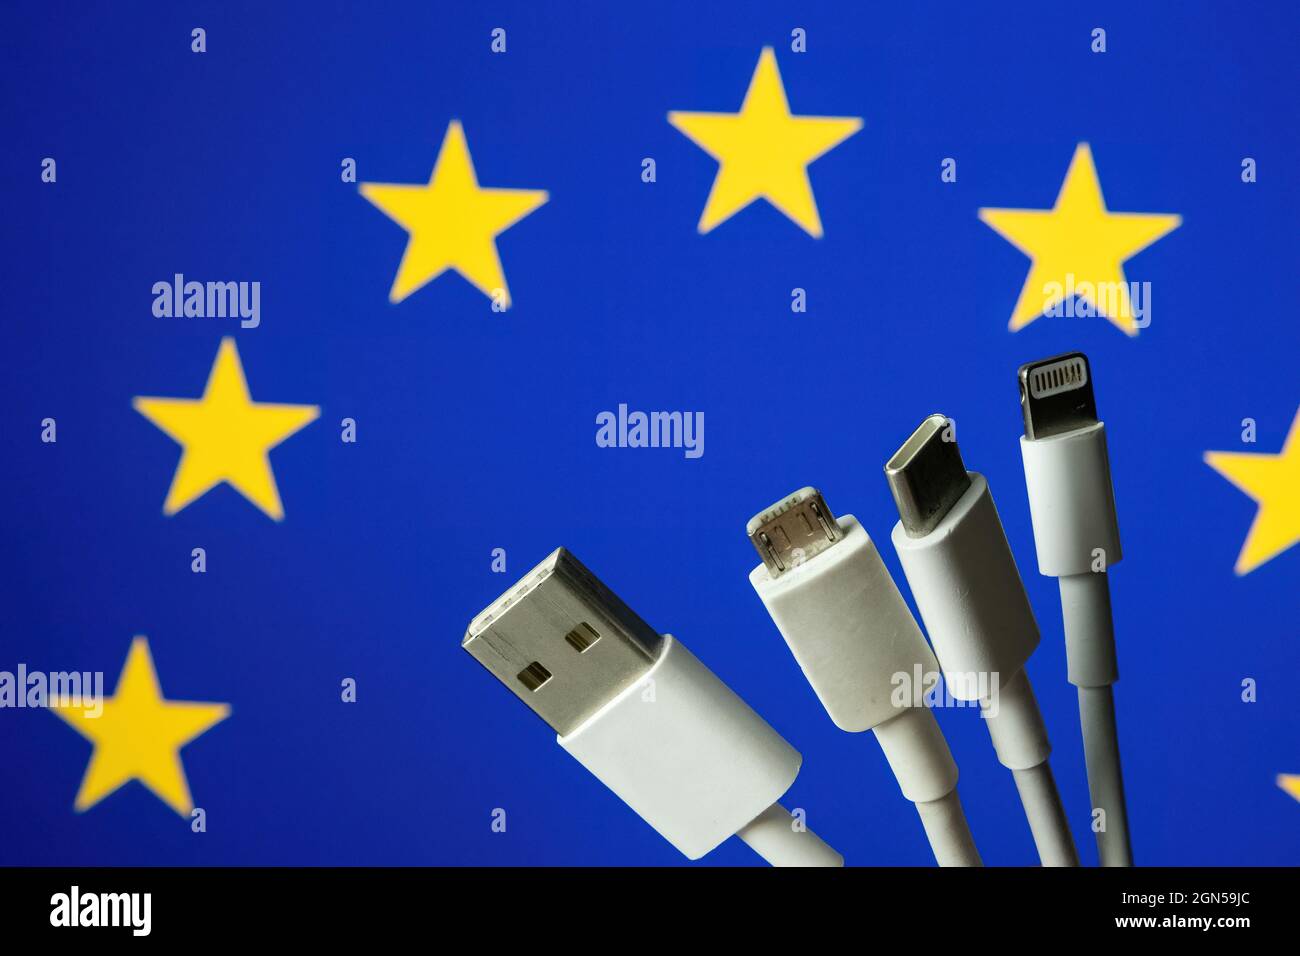 EU flag and different charging cables such as USB, USB-C, Micro USB, lightning cable. Concept for new EU universal charging cable legislation. Stock Photo